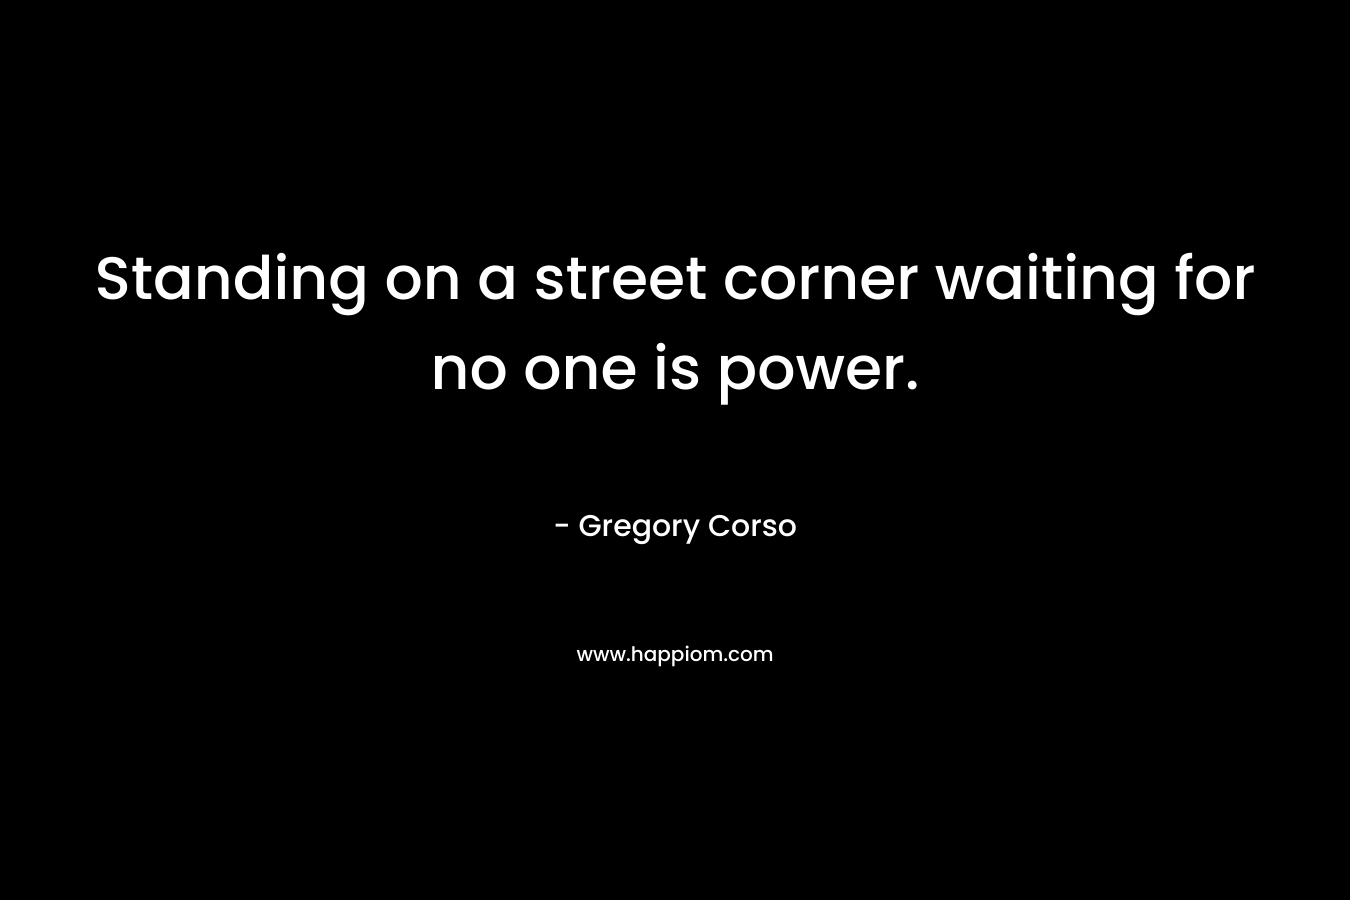 Standing on a street corner waiting for no one is power. – Gregory Corso